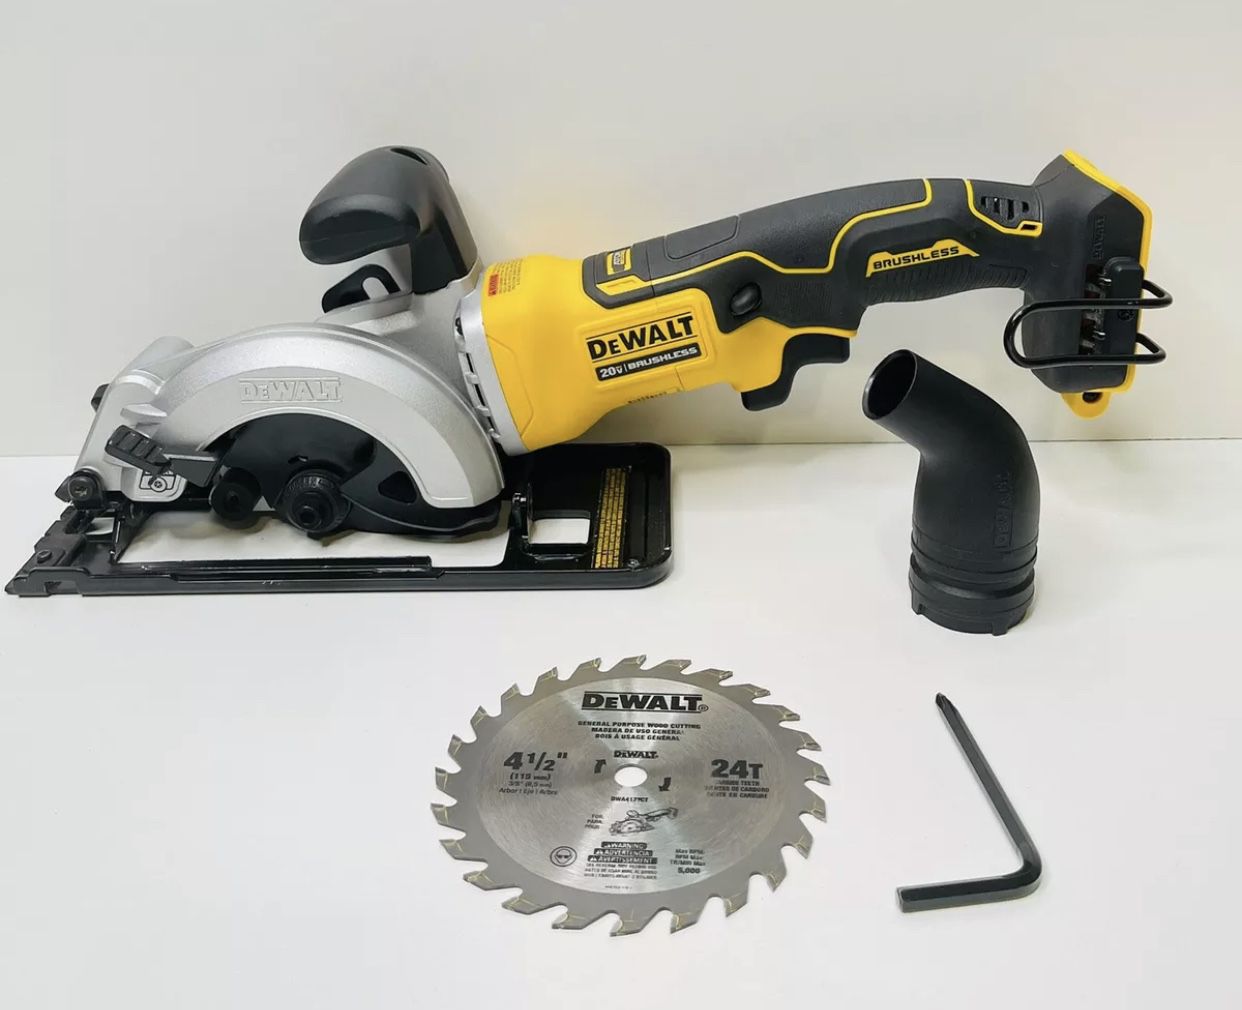 DEWALT ATOMIC 20V MAX BRUSHLESS 4-1/2 in. Circular Saw (Tool Only) DCS571B  LN M for Sale in Los Angeles, CA OfferUp